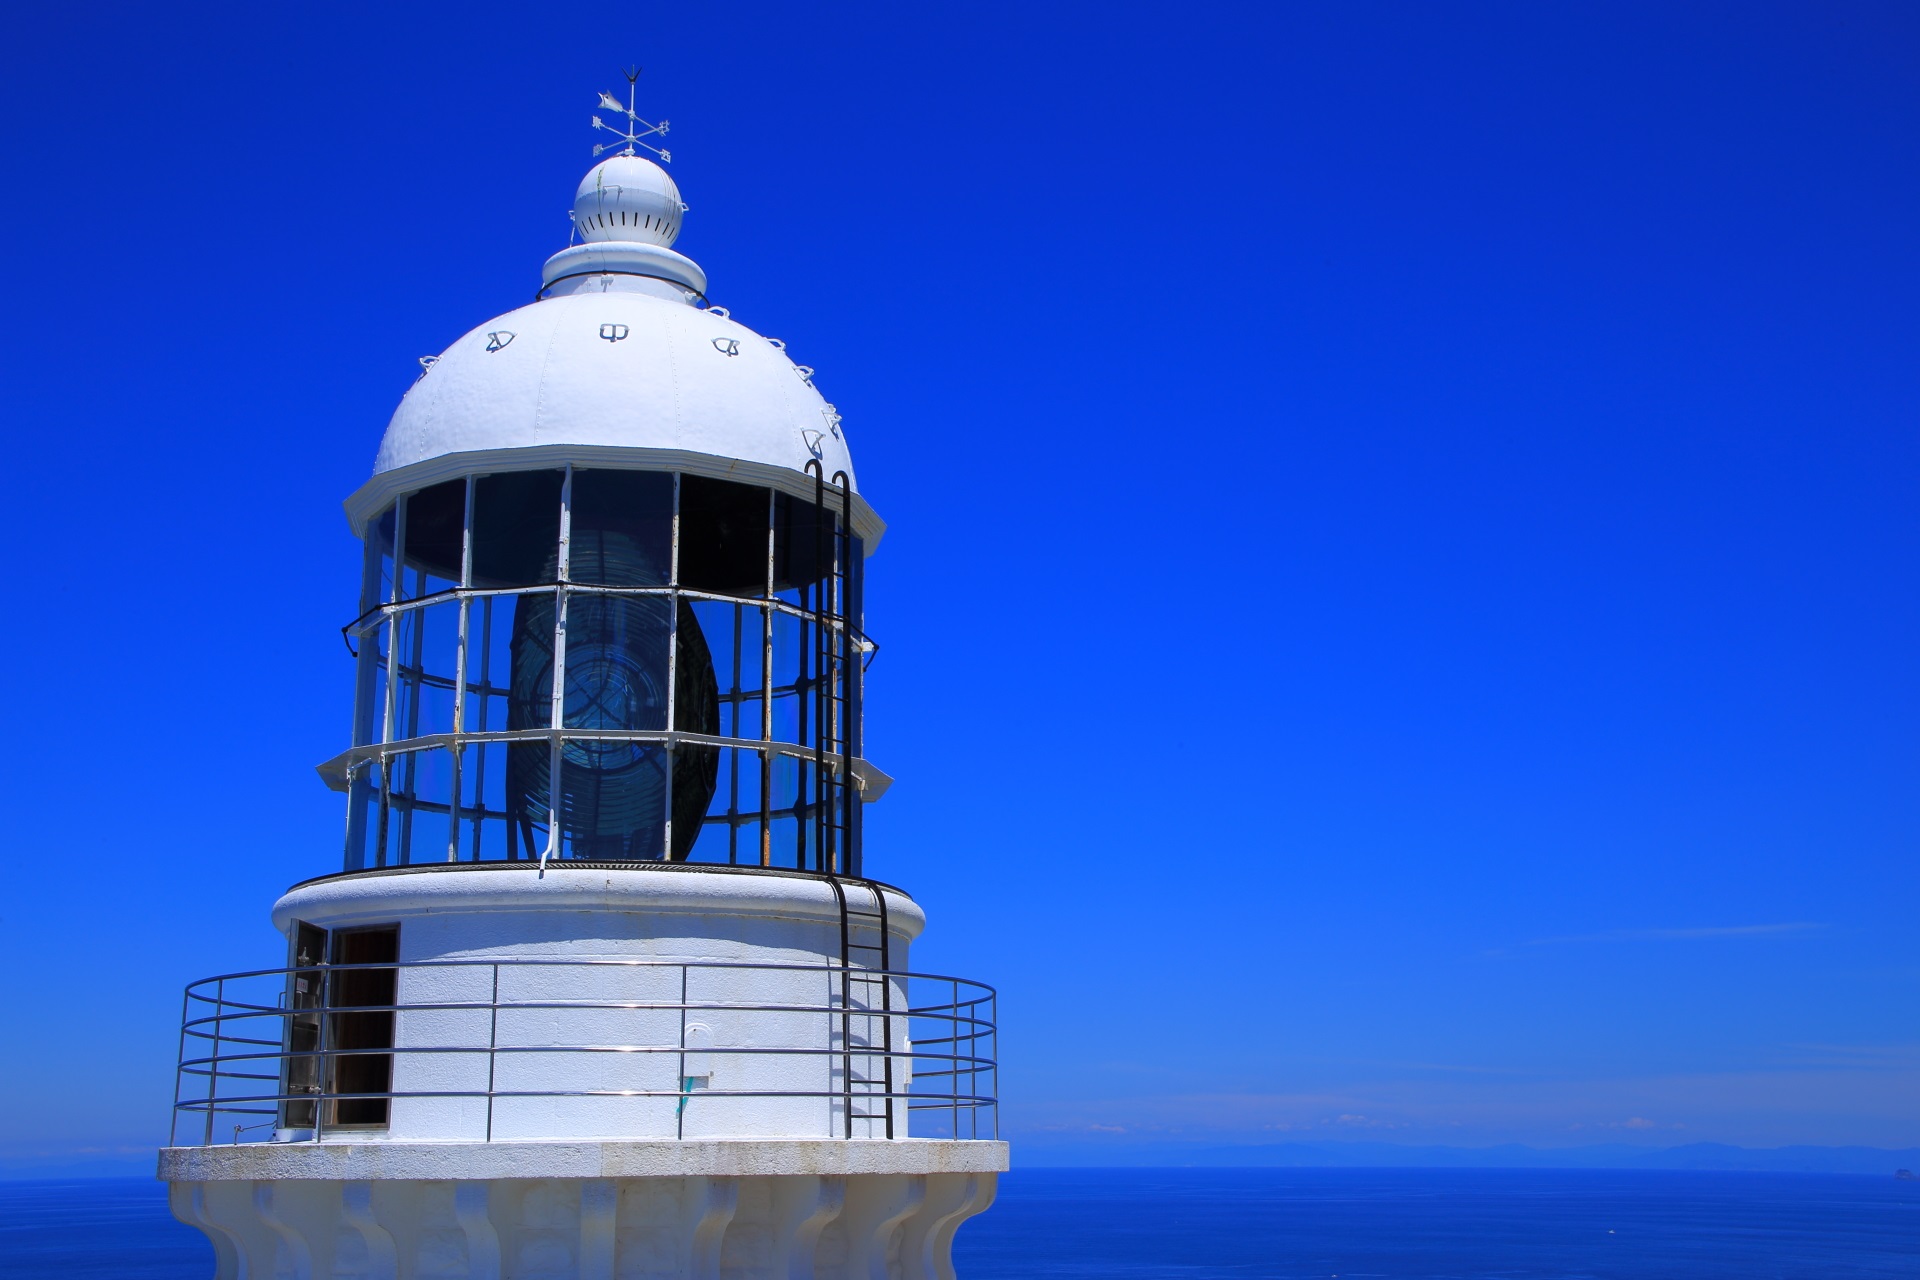 Kyoga-Misaki Lighthouse in Kyotango and blue sea and blue sky